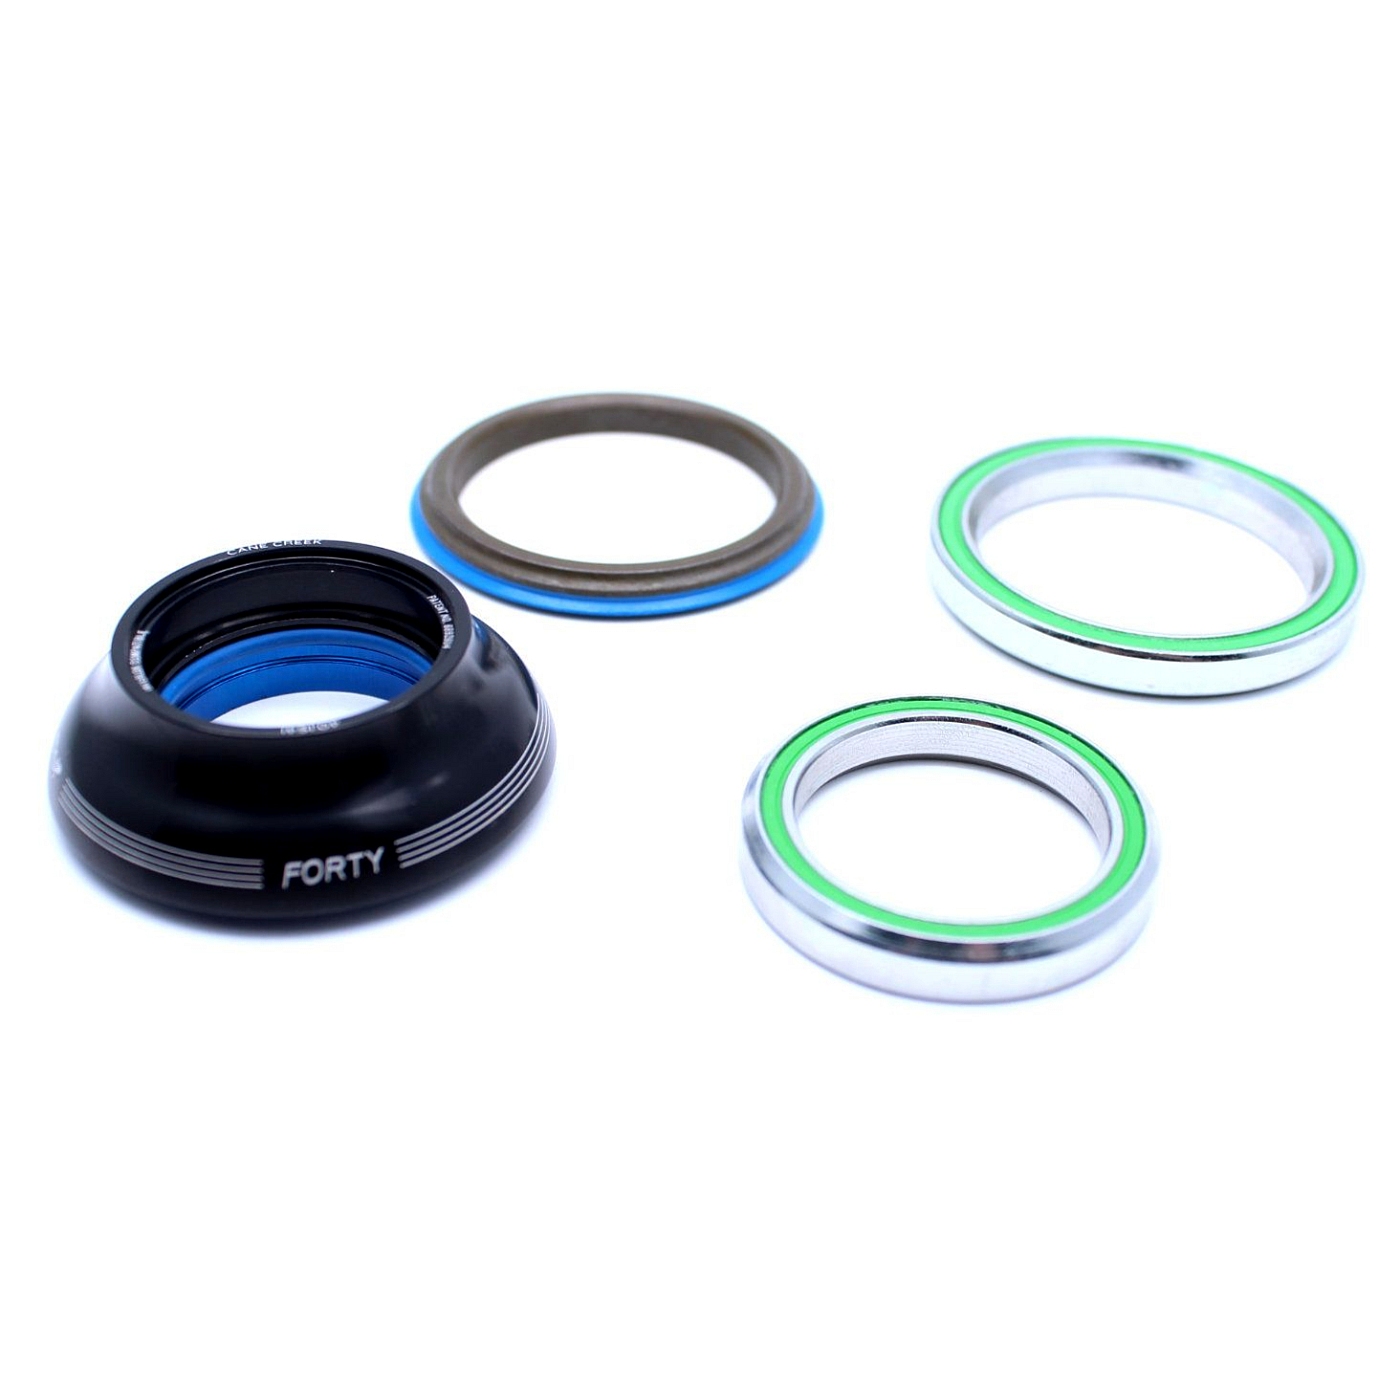 Image of Yeti Cycles Cane Creek Integrated Custom Headset - 12mm Tapered for SB150/165